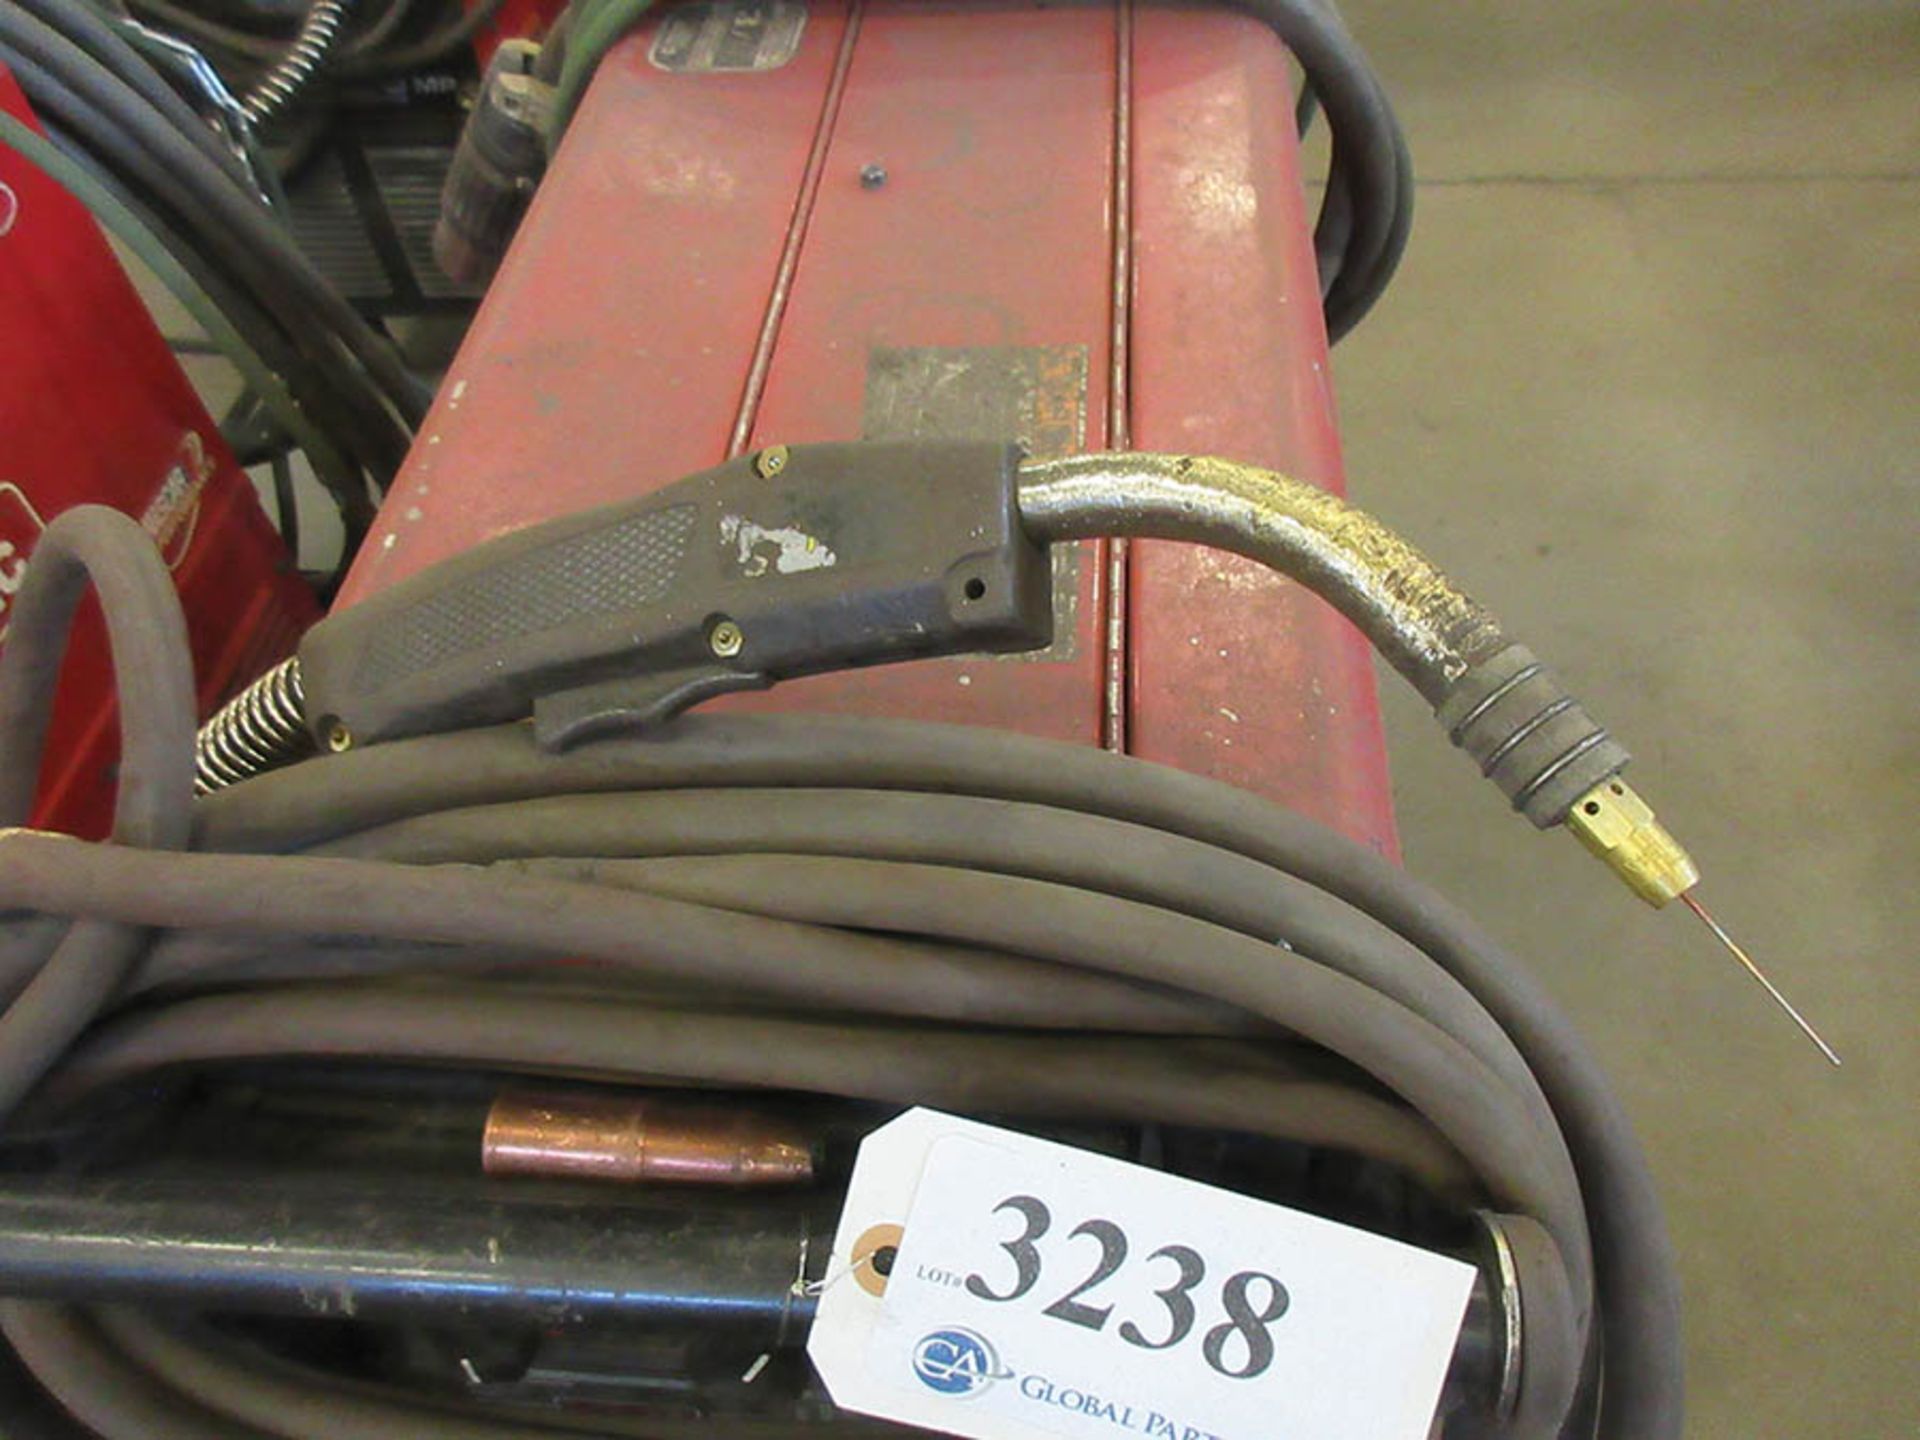 LINCOLN ELECTRIC 350MP POWER MIG WELDER WITH TWECO WELDSKILL MIG GUN - Image 3 of 3